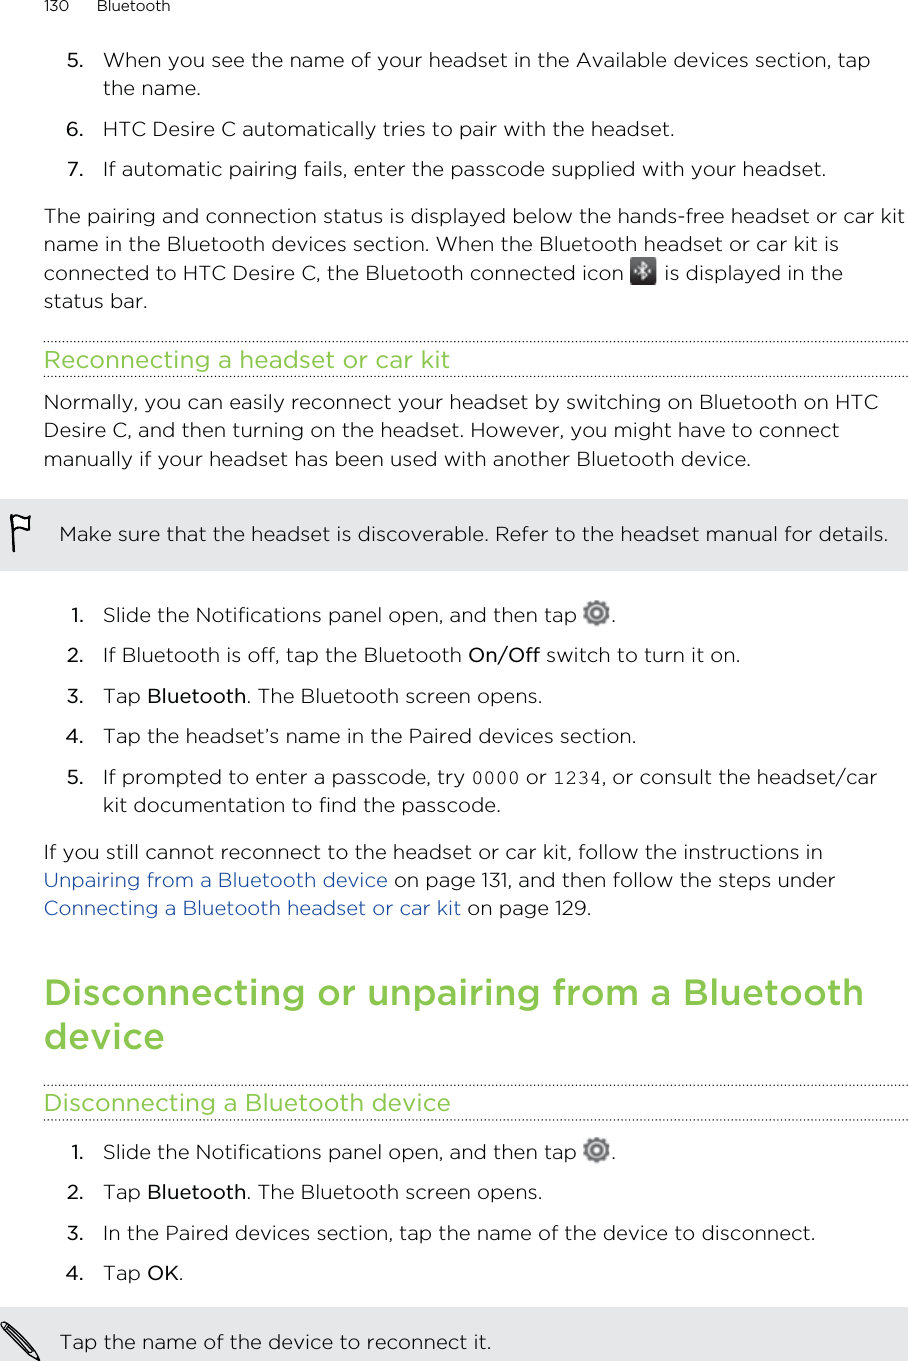 5. When you see the name of your headset in the Available devices section, tapthe name.6. HTC Desire C automatically tries to pair with the headset.7. If automatic pairing fails, enter the passcode supplied with your headset.The pairing and connection status is displayed below the hands-free headset or car kitname in the Bluetooth devices section. When the Bluetooth headset or car kit isconnected to HTC Desire C, the Bluetooth connected icon   is displayed in thestatus bar.Reconnecting a headset or car kitNormally, you can easily reconnect your headset by switching on Bluetooth on HTCDesire C, and then turning on the headset. However, you might have to connectmanually if your headset has been used with another Bluetooth device.Make sure that the headset is discoverable. Refer to the headset manual for details.1. Slide the Notifications panel open, and then tap  .2. If Bluetooth is off, tap the Bluetooth On/Off switch to turn it on.3. Tap Bluetooth. The Bluetooth screen opens.4. Tap the headset’s name in the Paired devices section.5. If prompted to enter a passcode, try  or , or consult the headset/carkit documentation to find the passcode.If you still cannot reconnect to the headset or car kit, follow the instructions in Unpairing from a Bluetooth device on page 131, and then follow the steps under Connecting a Bluetooth headset or car kit on page 129.Disconnecting or unpairing from a BluetoothdeviceDisconnecting a Bluetooth device1. Slide the Notifications panel open, and then tap  .2. Tap Bluetooth. The Bluetooth screen opens.3. In the Paired devices section, tap the name of the device to disconnect.4. Tap OK.Tap the name of the device to reconnect it.130 Bluetooth